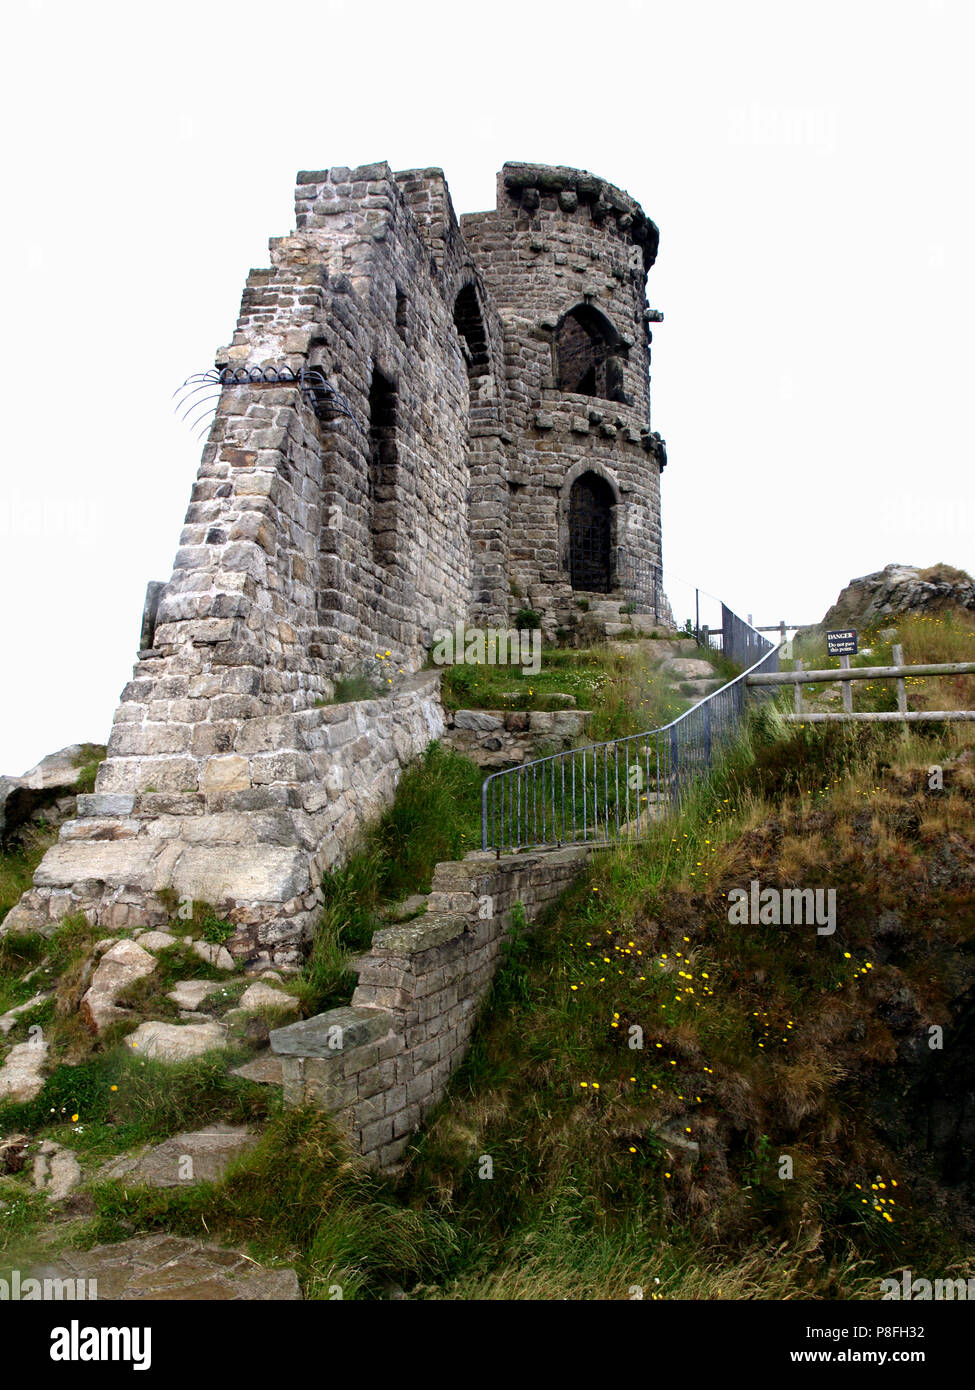 Mow Cop Castle, a ruined folly built as a summerhouse by Randle Wilbraham l on the Cheshire, Staffordshire border in England Stock Photo